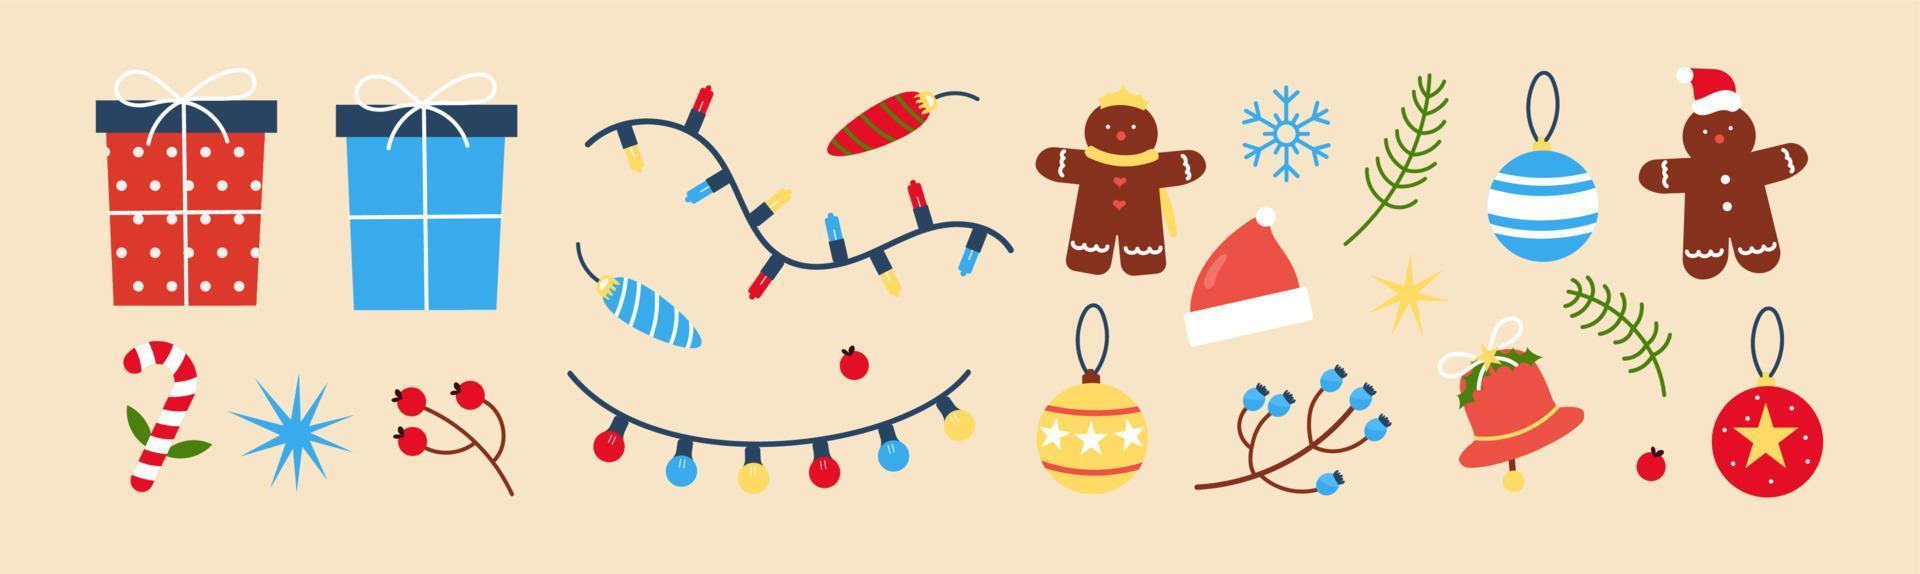 Christmas collection element with traditional Christmas symbols and decorative elements. Vintage style with traditional Christmas and New Year elements. Hand drawn flat vector illustration.